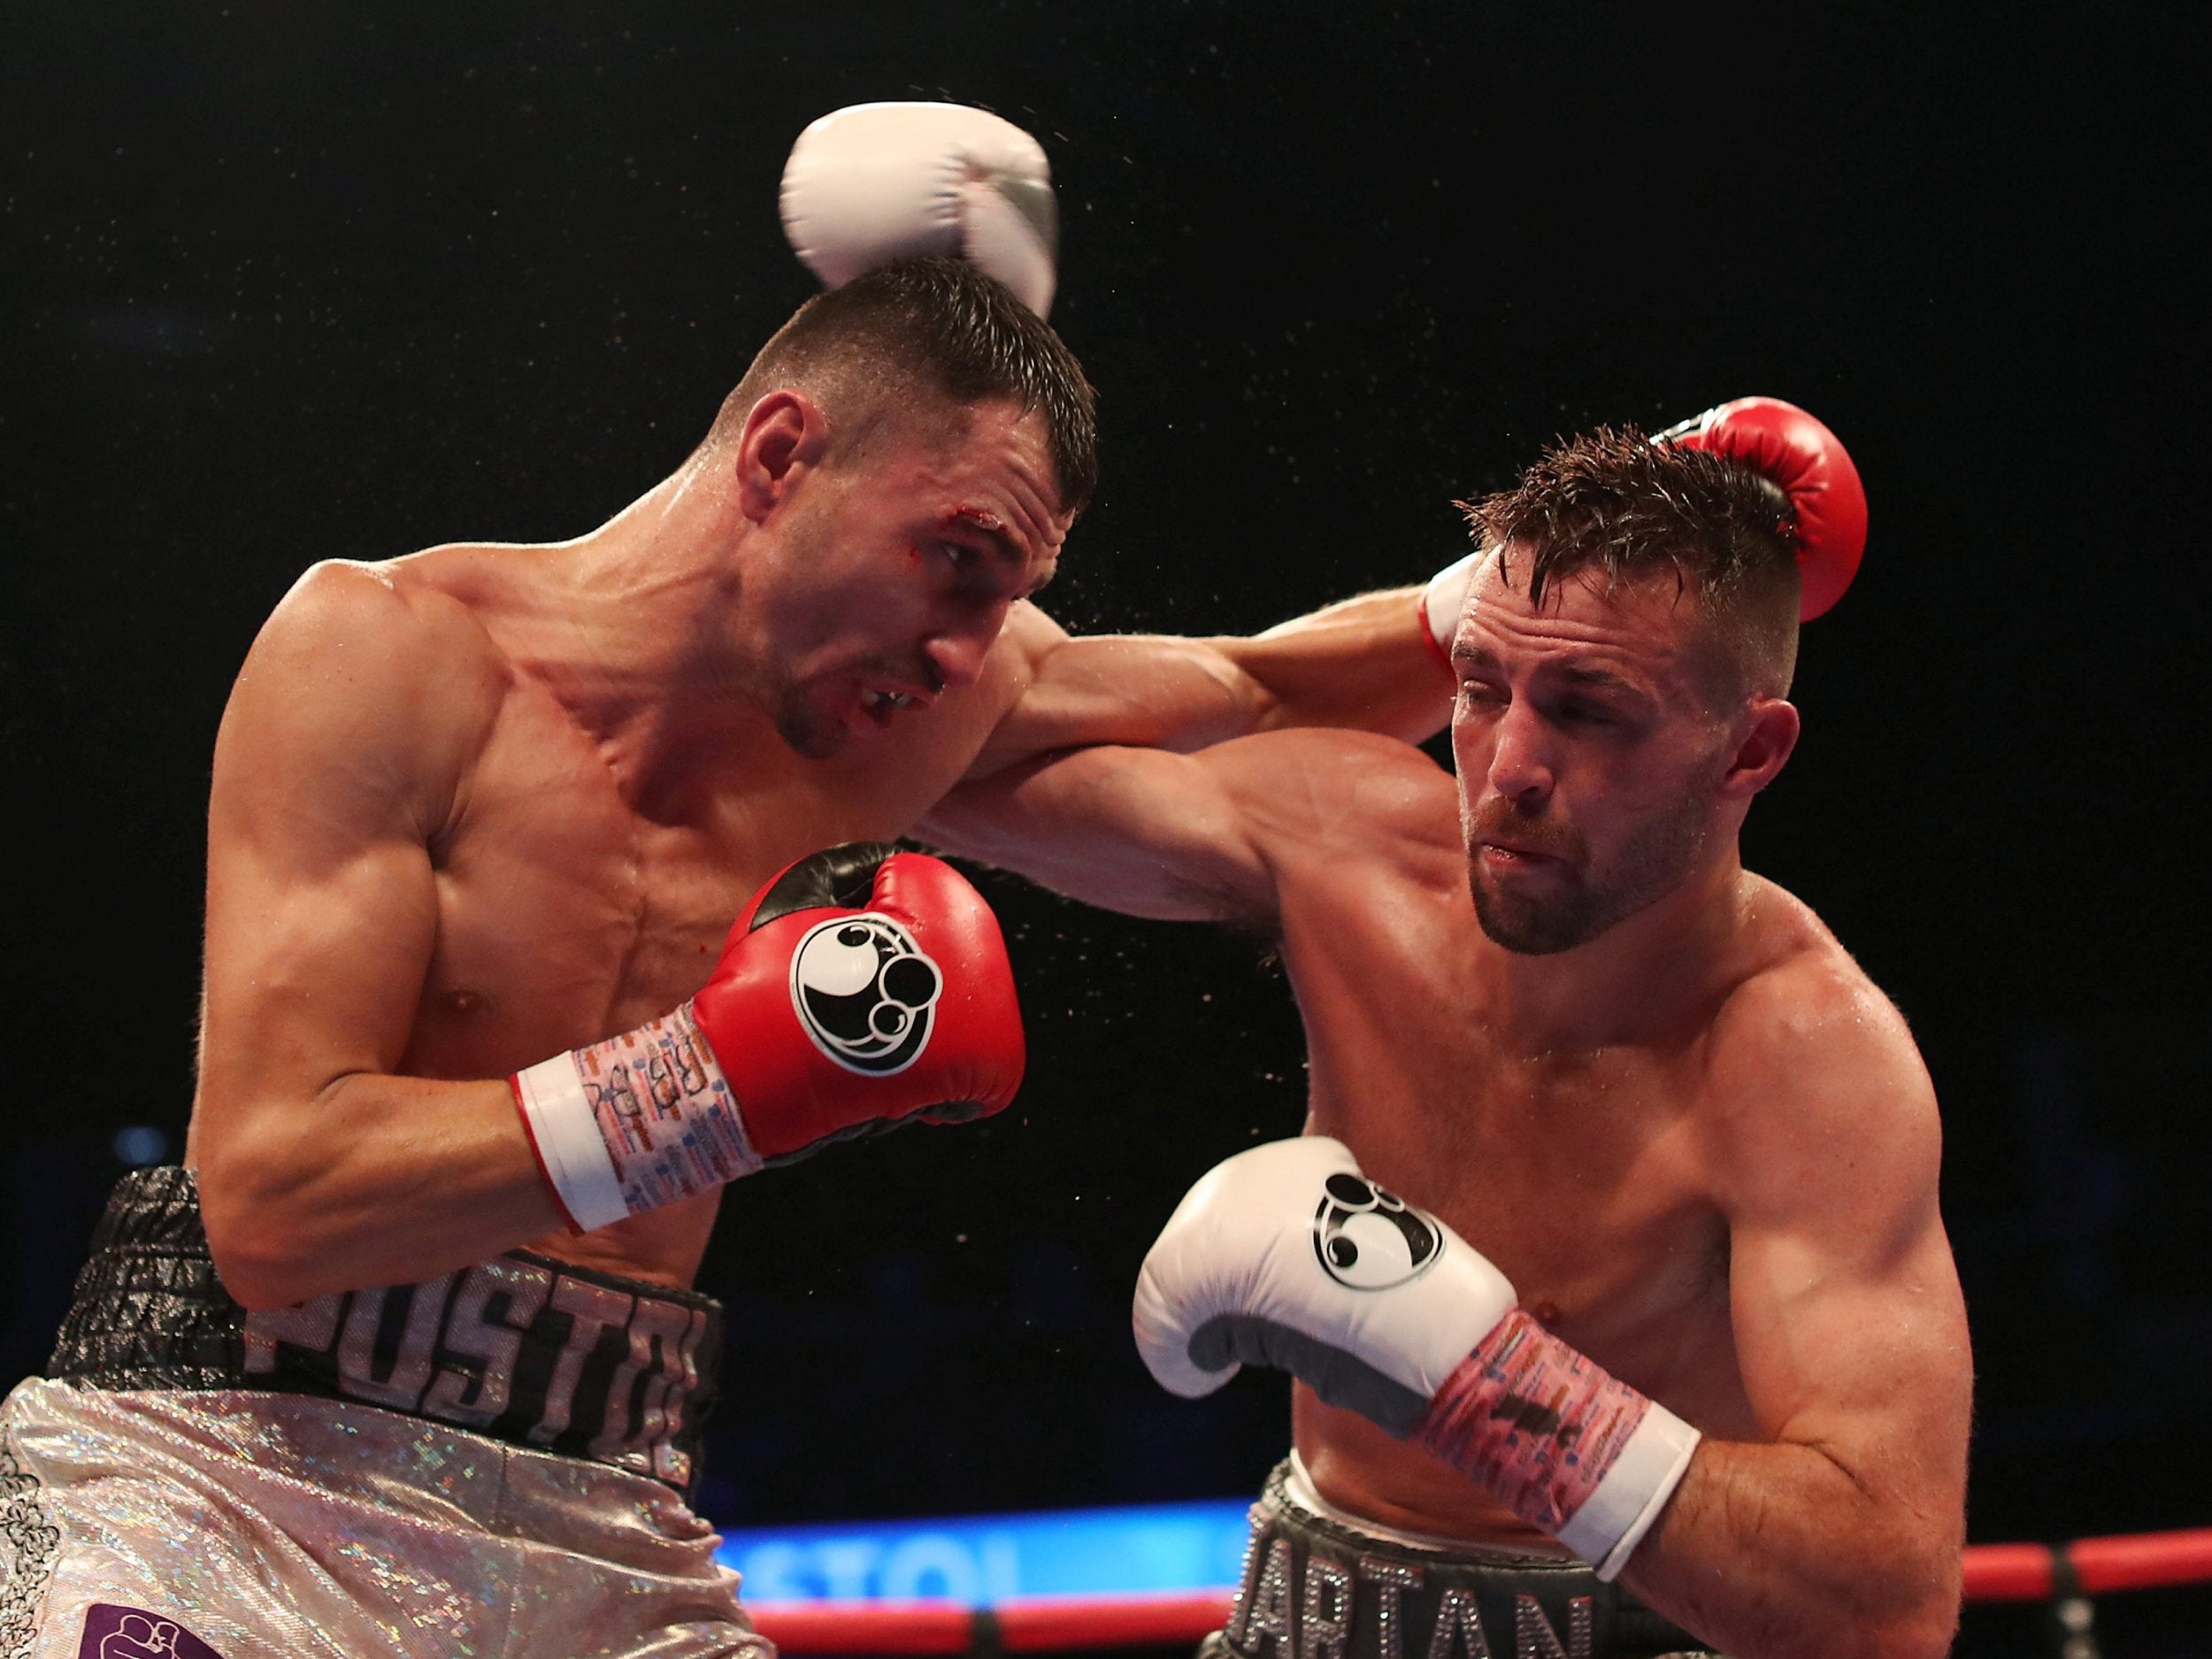 Taylor took a convincing points victory to take the No 1 challenger slot to Jose Ramirez